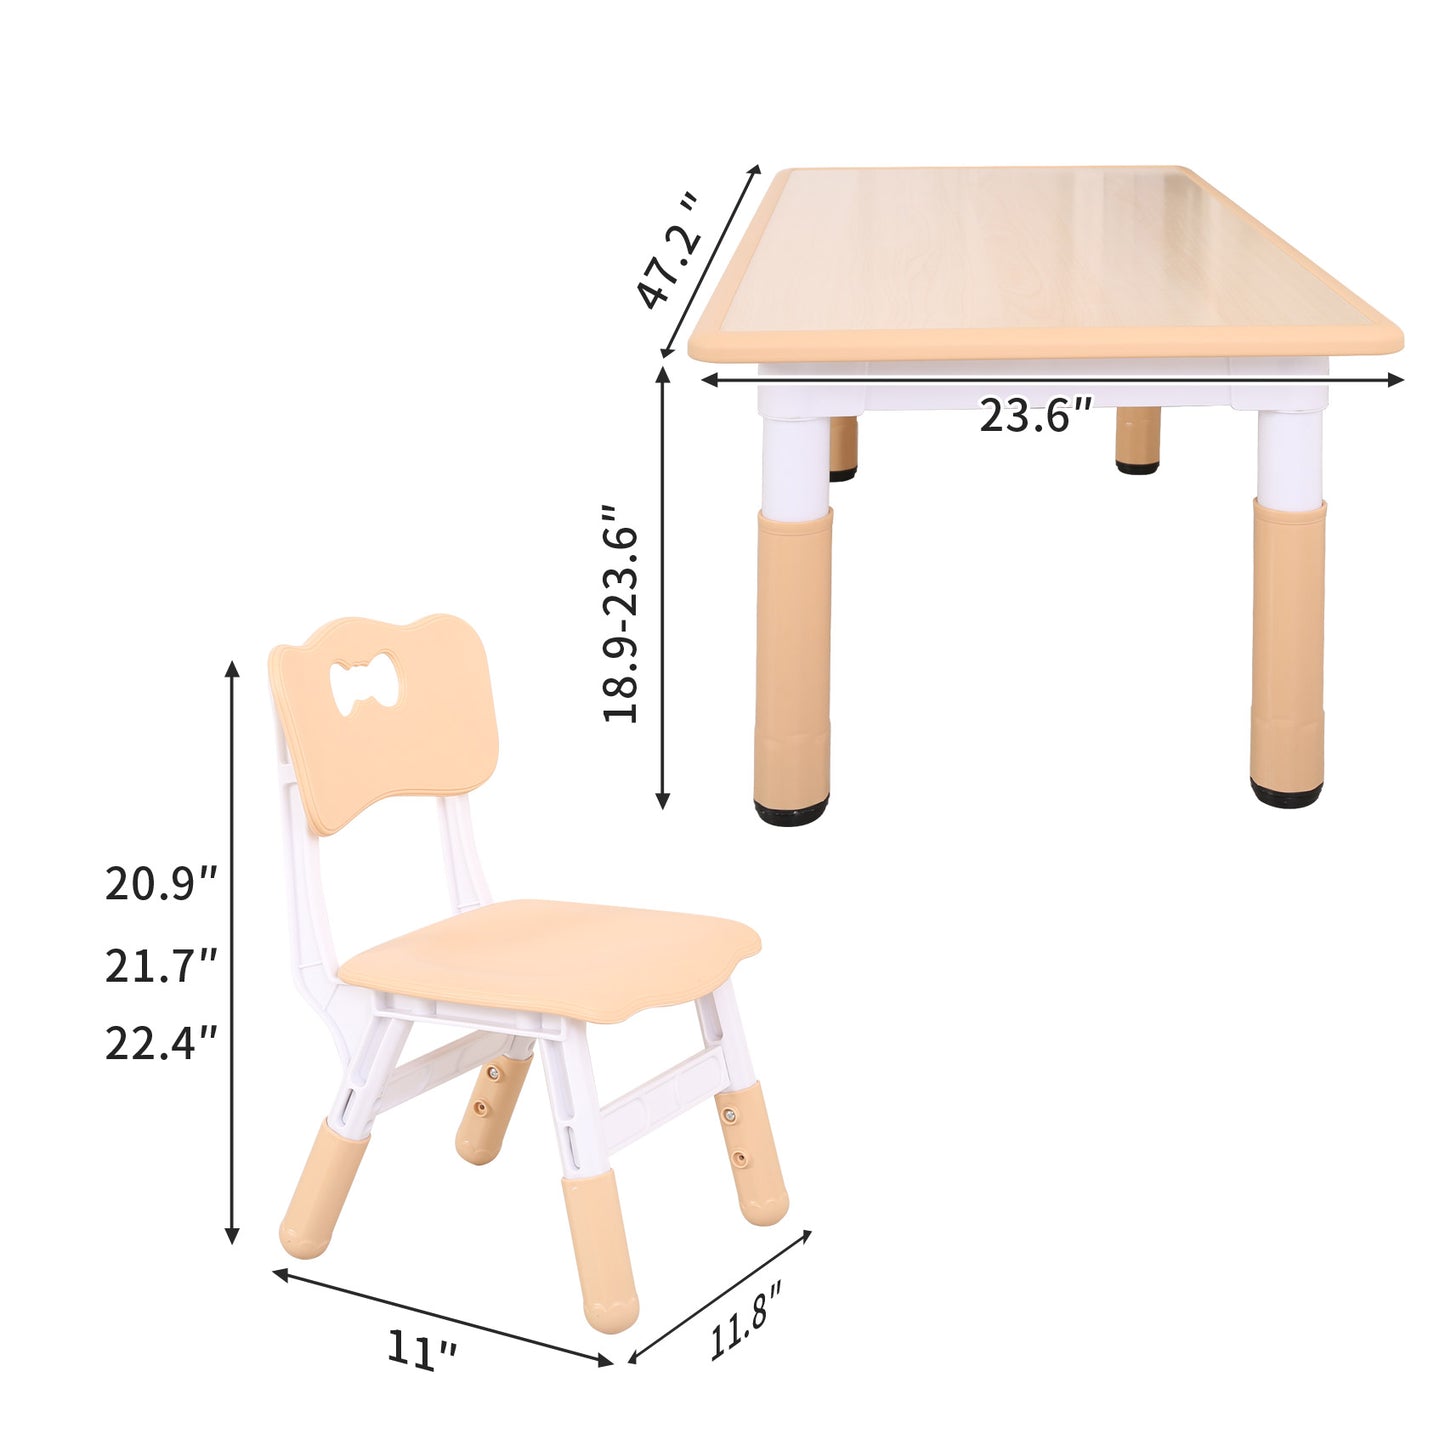 UNICOO - Kids Study Table and Chairs Set, Height Adjustable Plastic Children Art Desk with 4 Seats, Kids Multi Activity Table Set Kids Table 5 Piece Set - BY-120